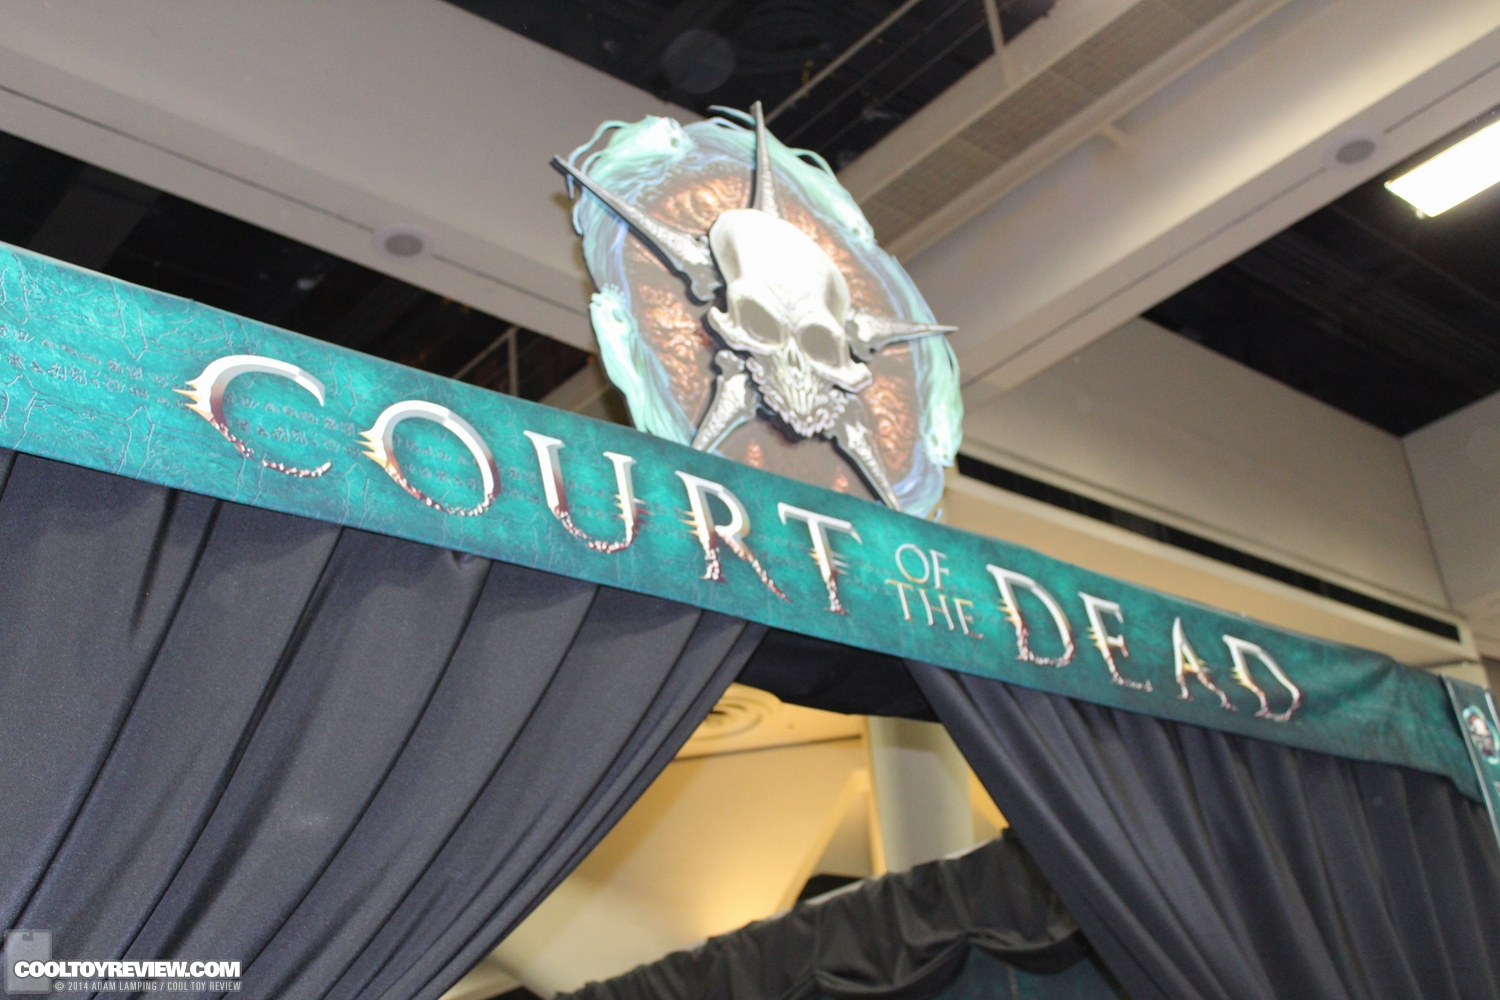 san-diego-comic-con-2014-sideshow-collectibles-court-of-the-dead-001.JPG